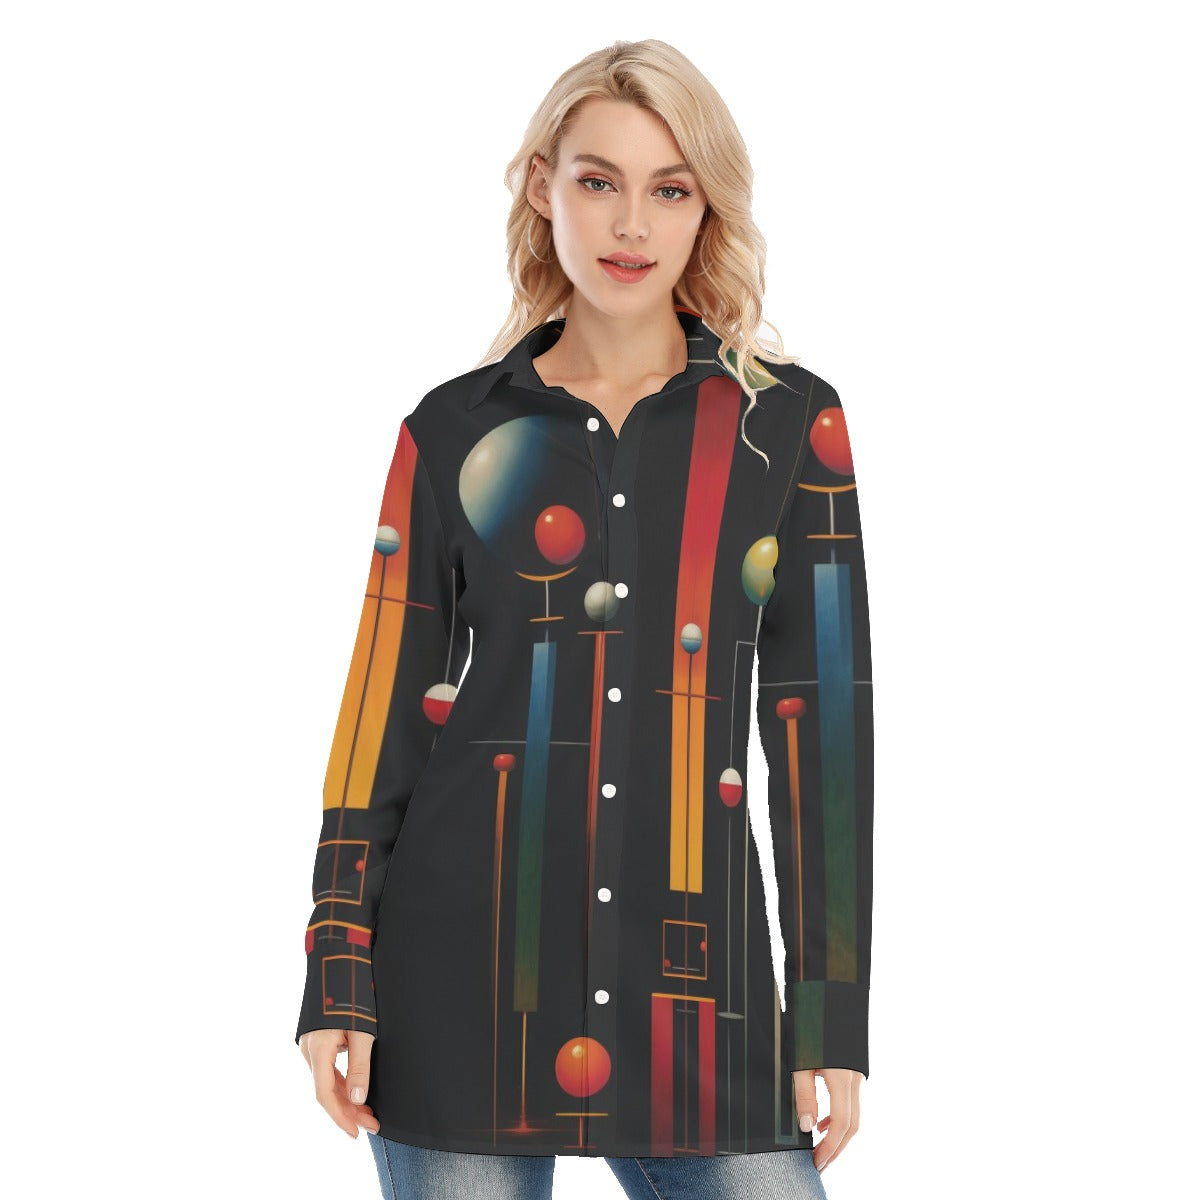 3R9G6 All-Over Print Women's Long Shirt |115GSM 98% Cotton and 2% spandex